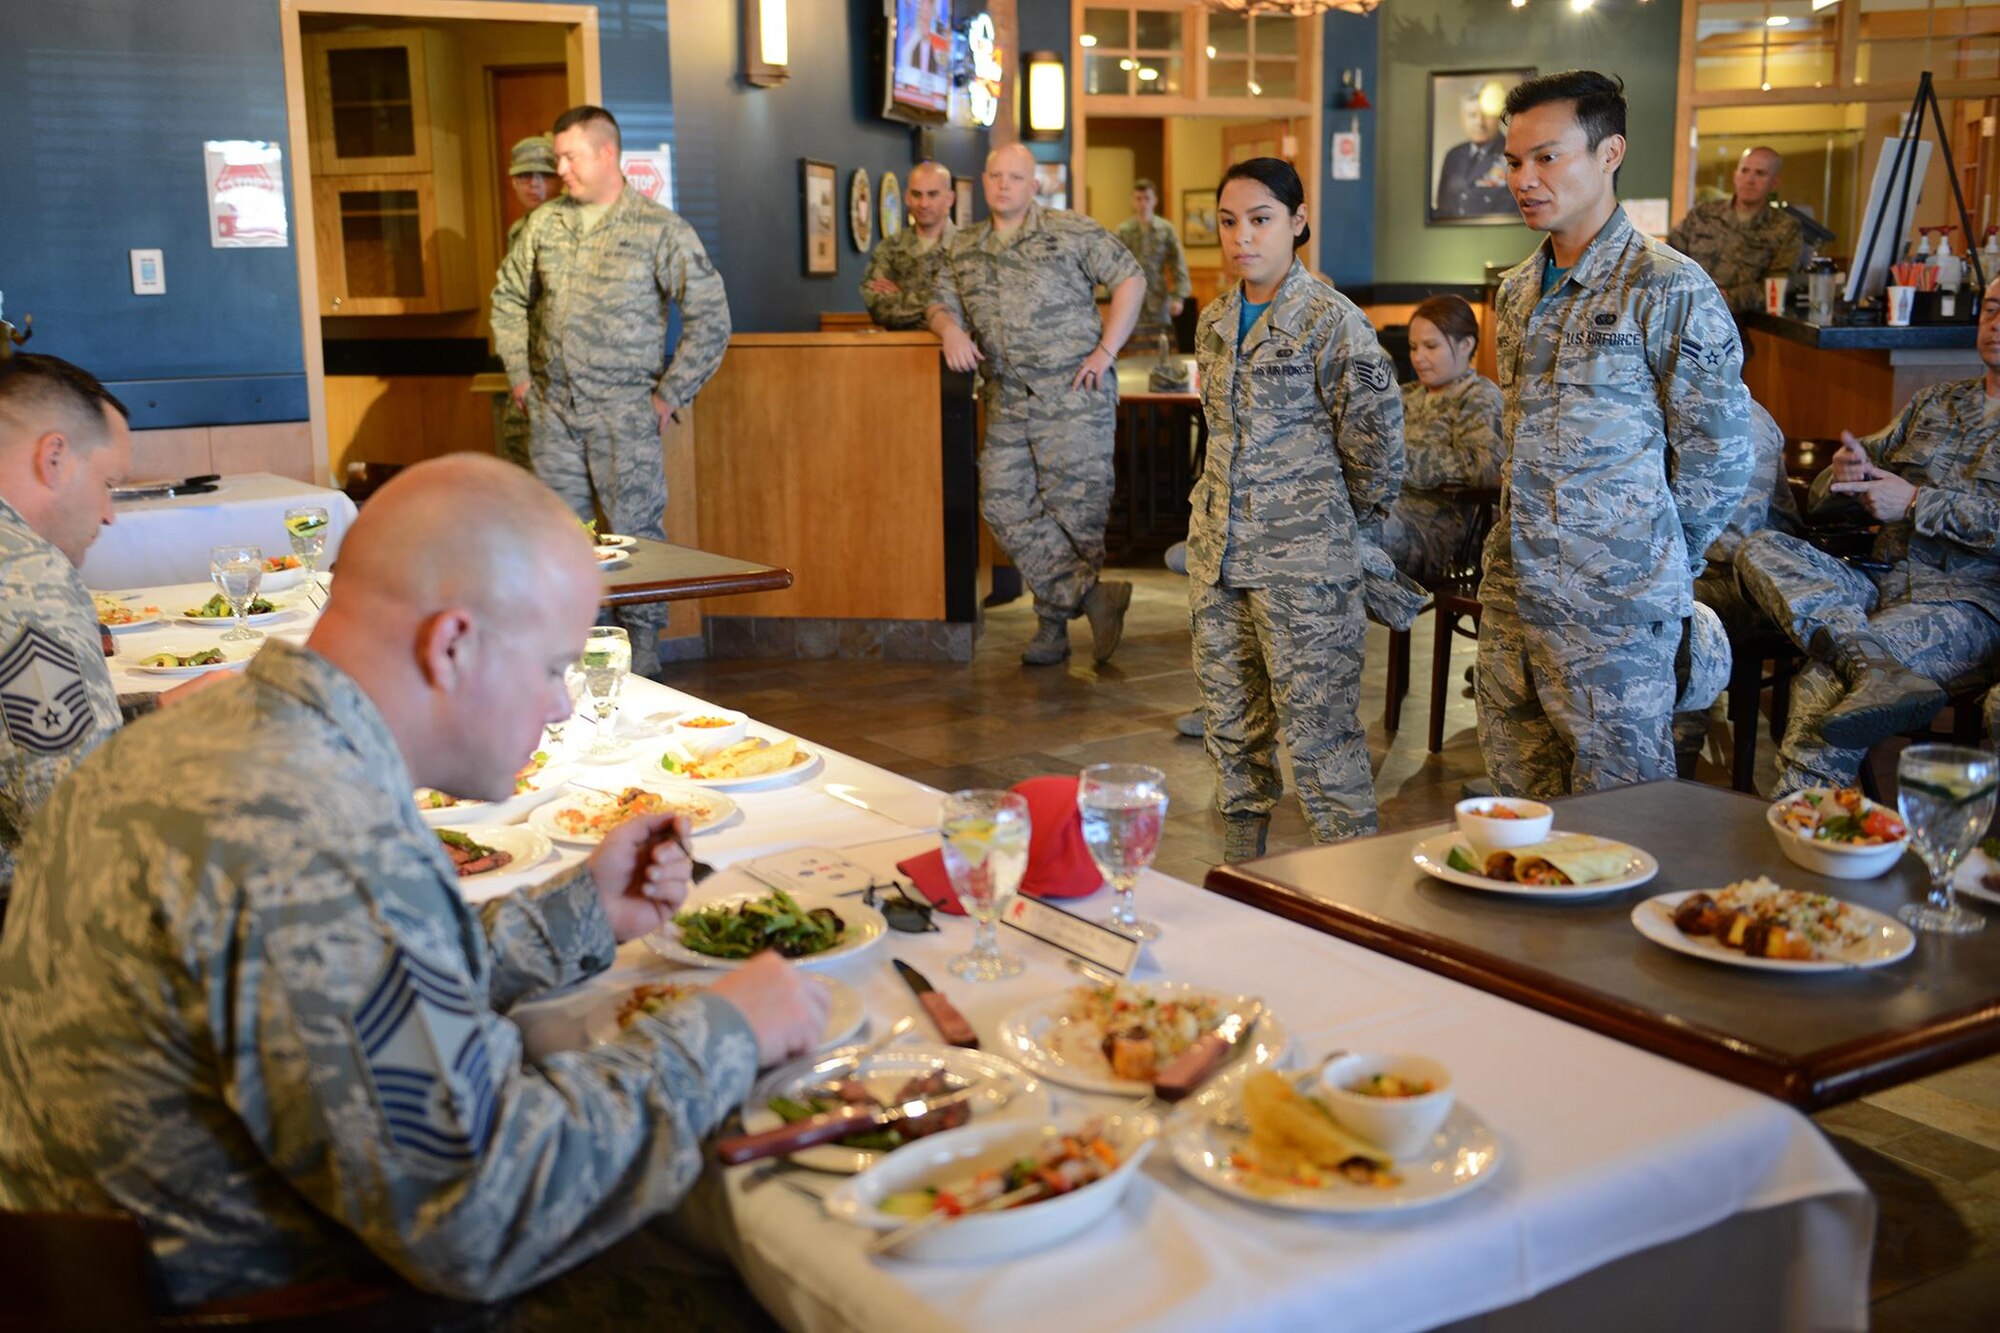 Staff Sgt. Amber Sansone and Airman 1st Class Nicki Agunos, both 341st Force Support Squadron missile chefs, wait as the judges sample the dishes they prepared for the Warrior Chef competition June 7, 2017 at Malmstrom Air Force Base, Mont. Sansone and Agunos won the competition with a meal of steak with mango sauce, shrimp and vegetables with honey almond sauce, garlic mashed potatoes and mango salad. (U.S. Air Force photo/Staff Sgt. Delia Marchick)